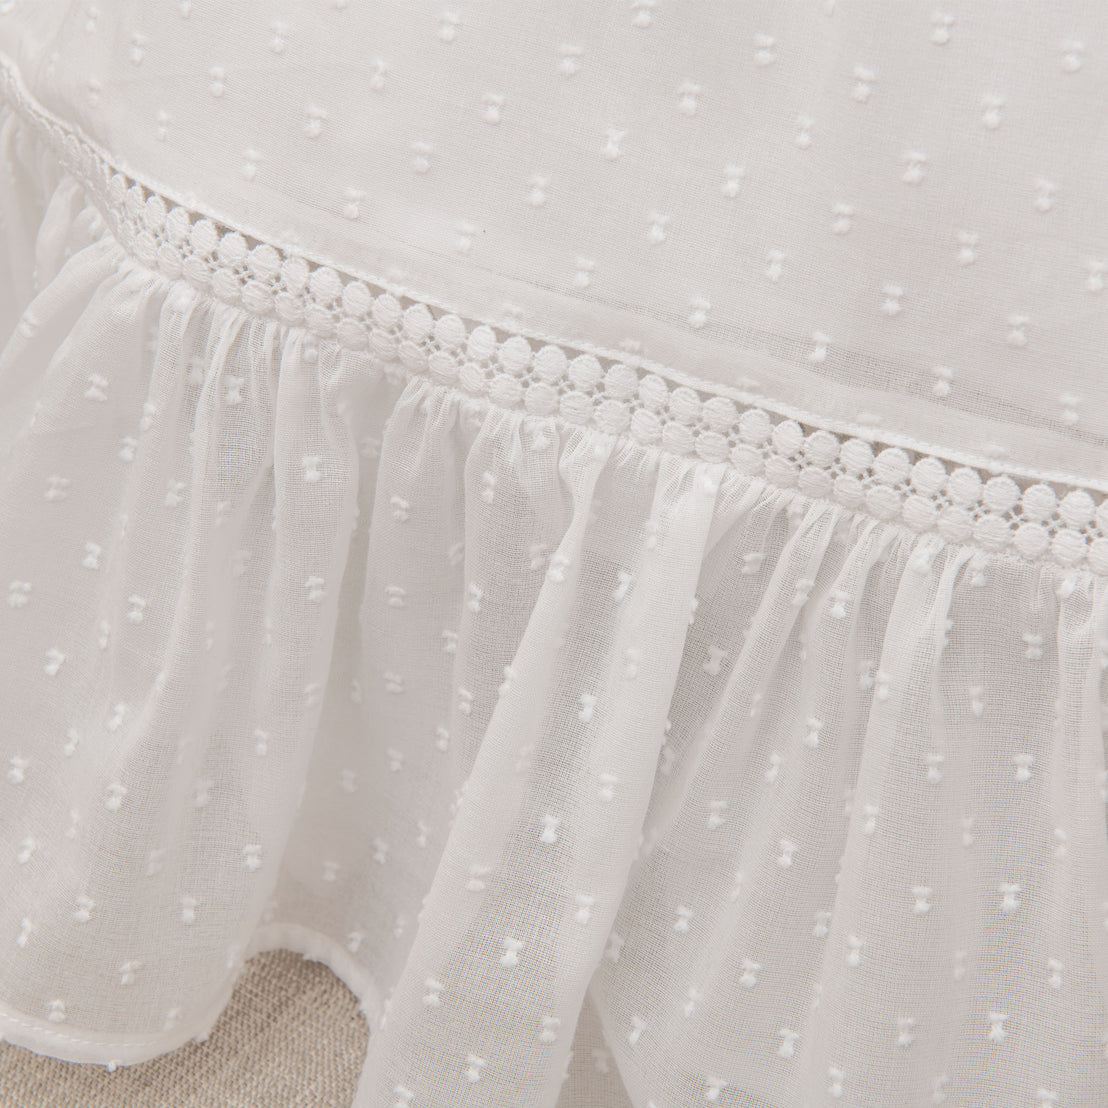 Close-up of the Mila Cotton Gown's skirt detail showing textured dots and a delicate lace trim.